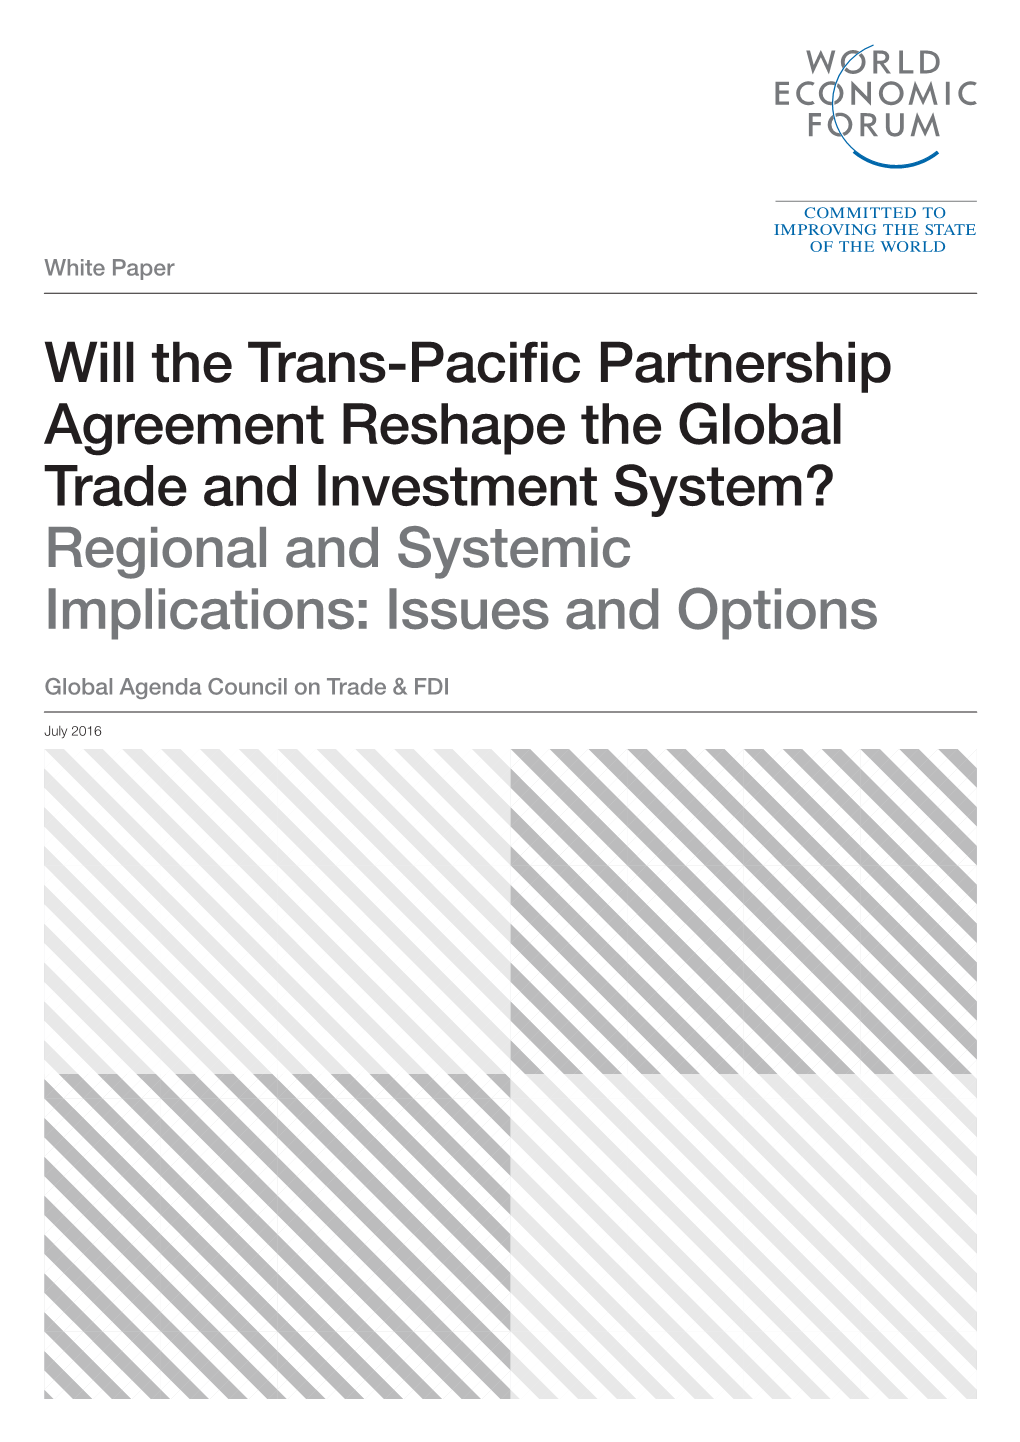 Will the Trans-Pacific Partnership Agreement Reshape the Global Trade and Investment System? Regional and Systemic Implications: Issues and Options